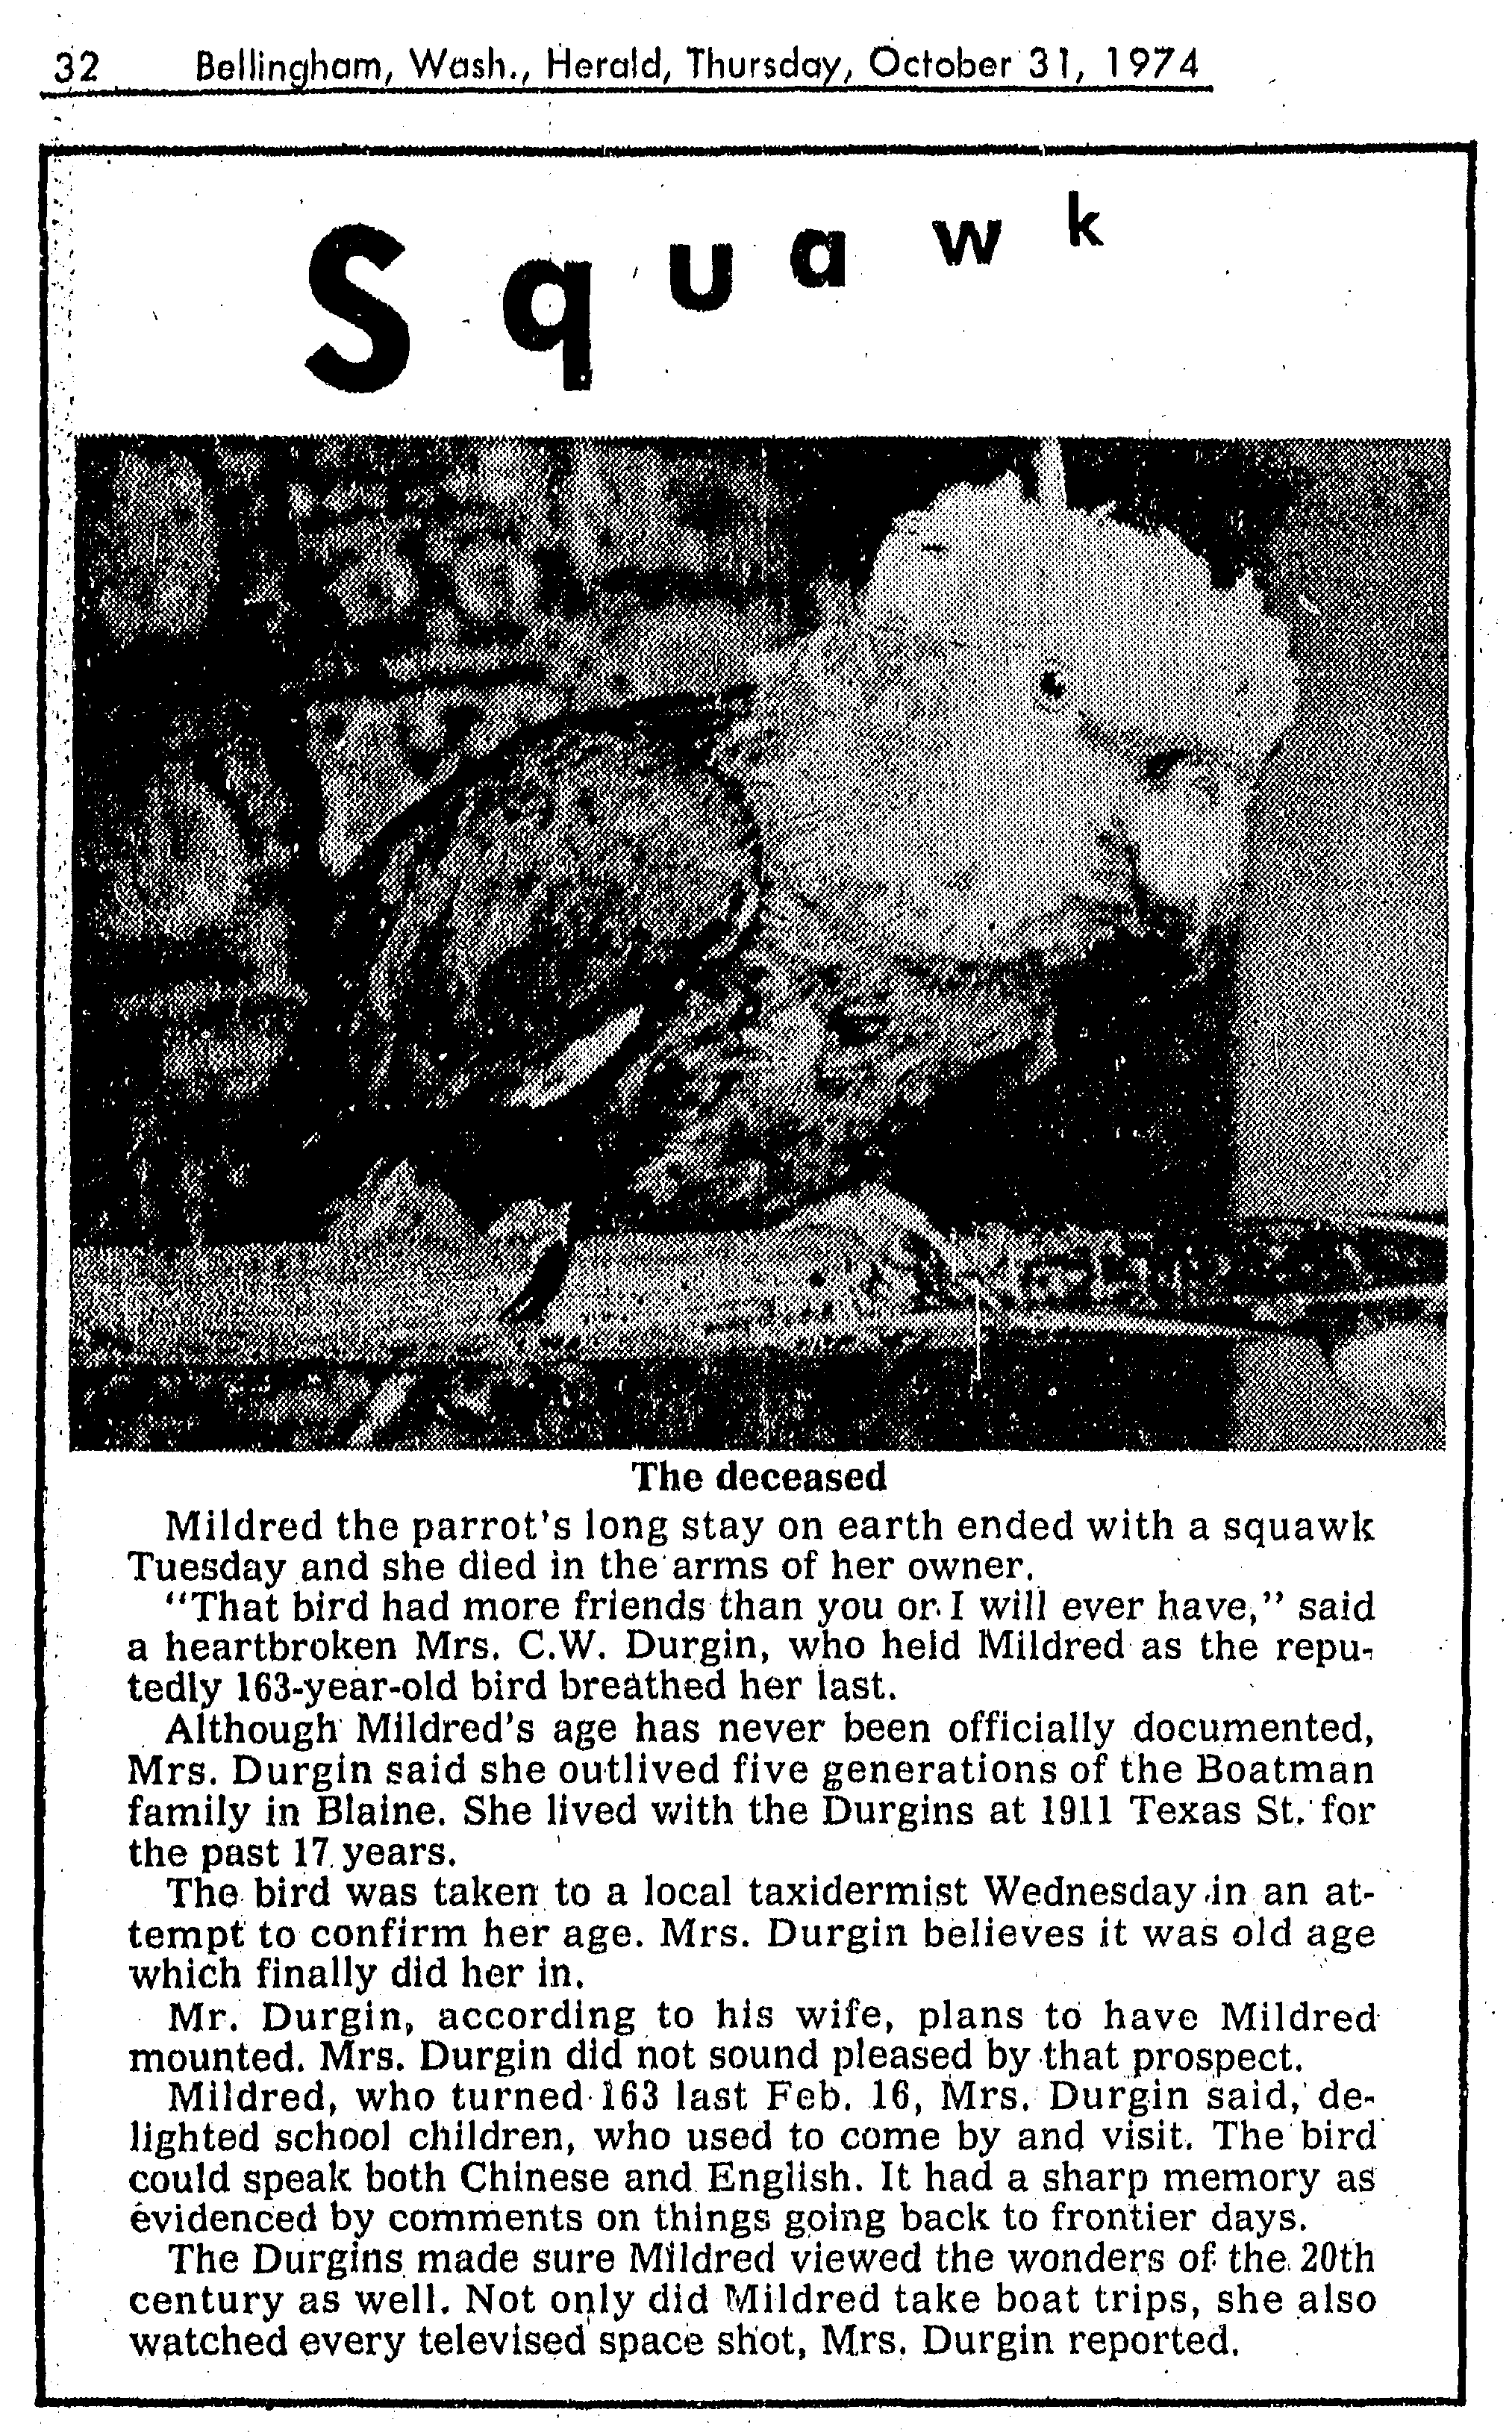 Squawk.  Obituary of Mildred the Parrot, Oct 31, 1974.